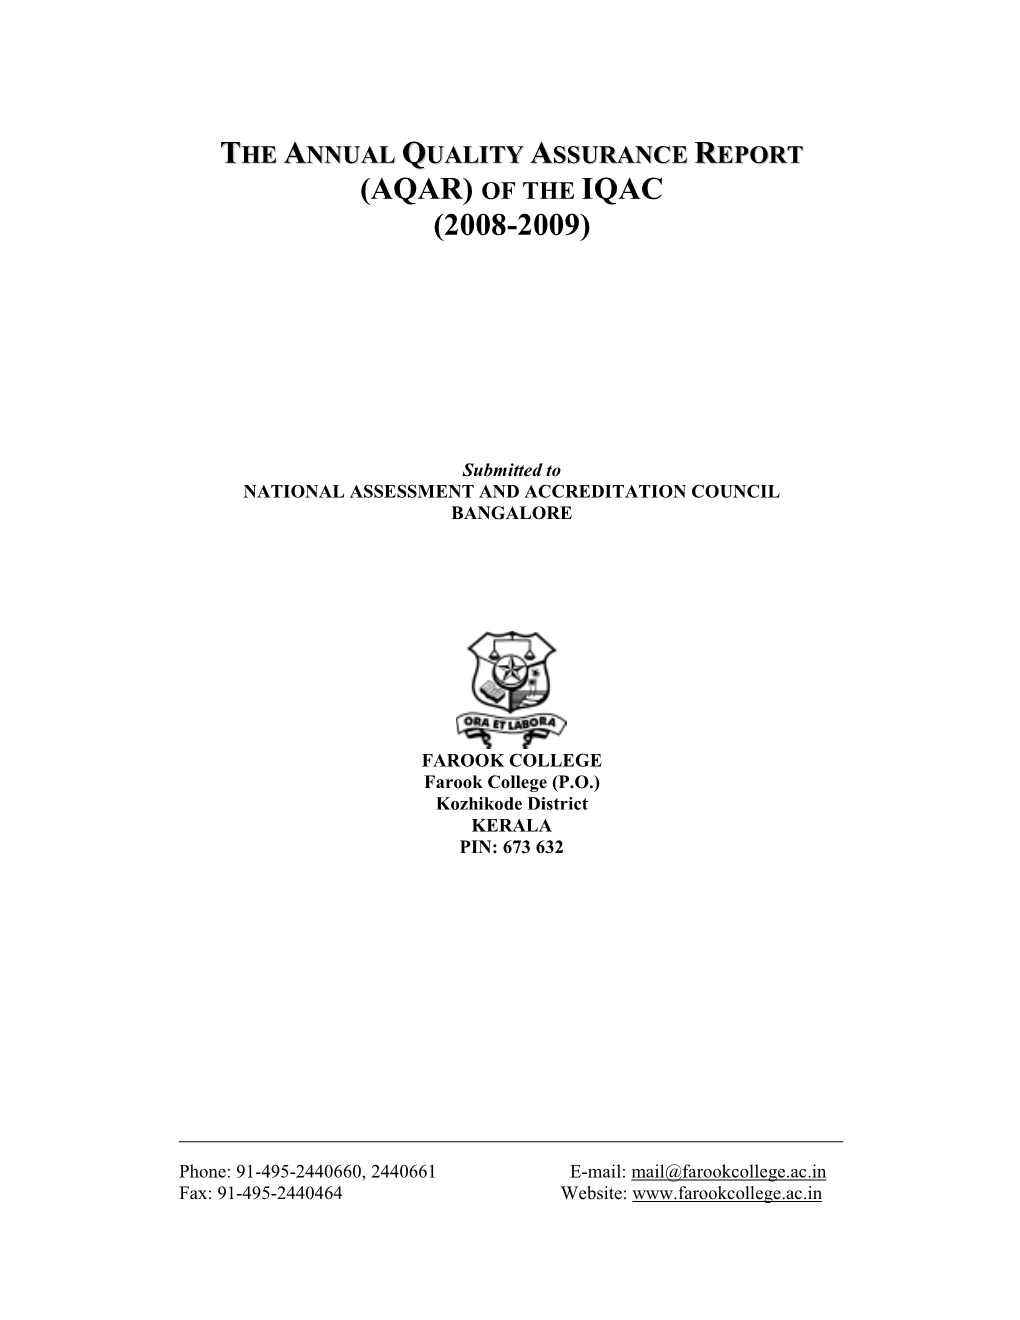 The Annual Quality Assurance Report (Aqar) of the Iqac (2008-2009)